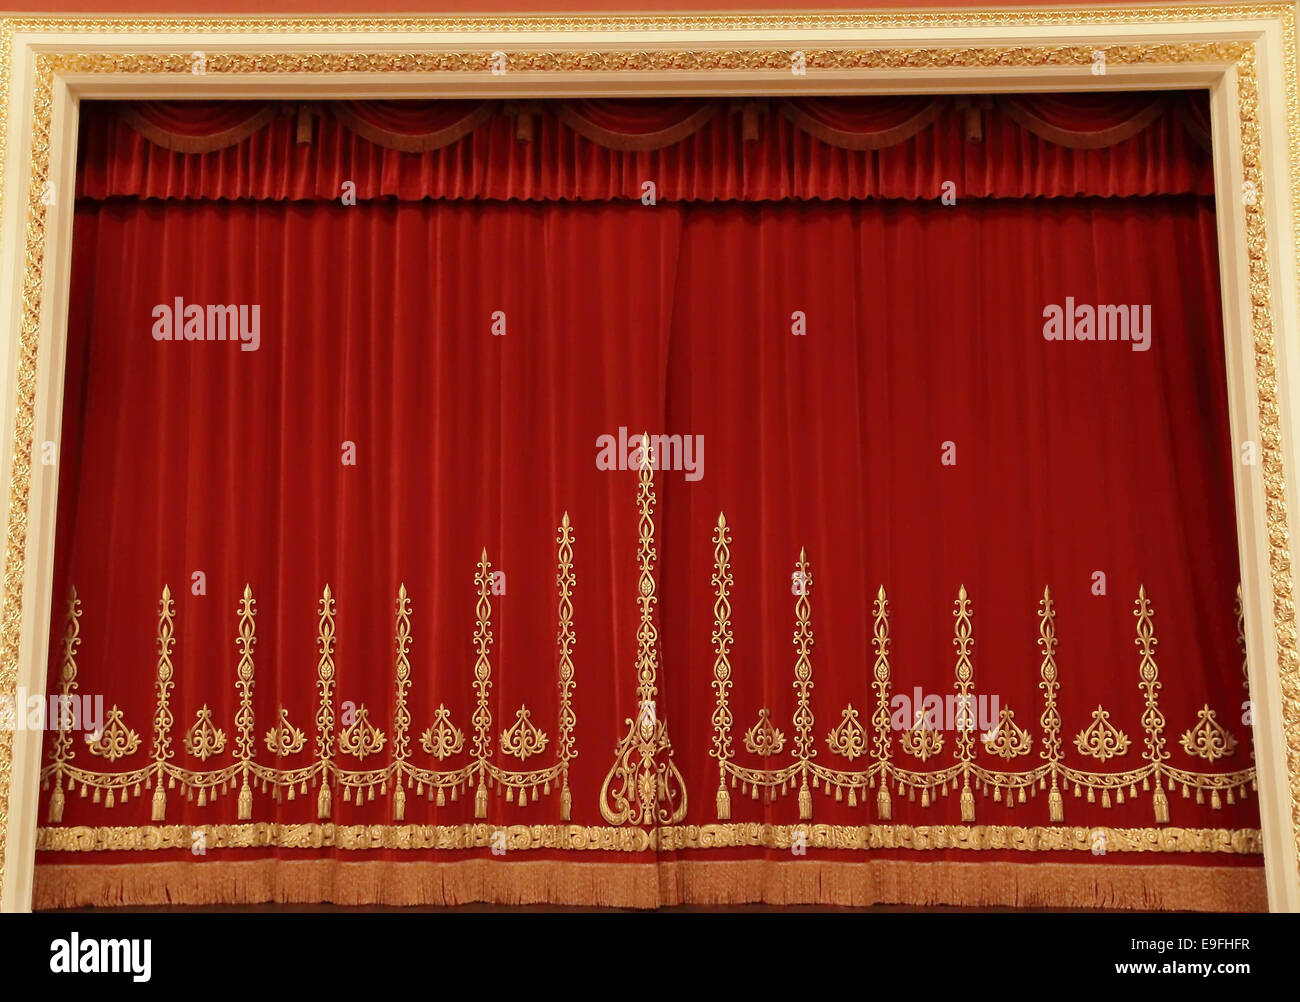 Theatrical red curtain Stock Photo